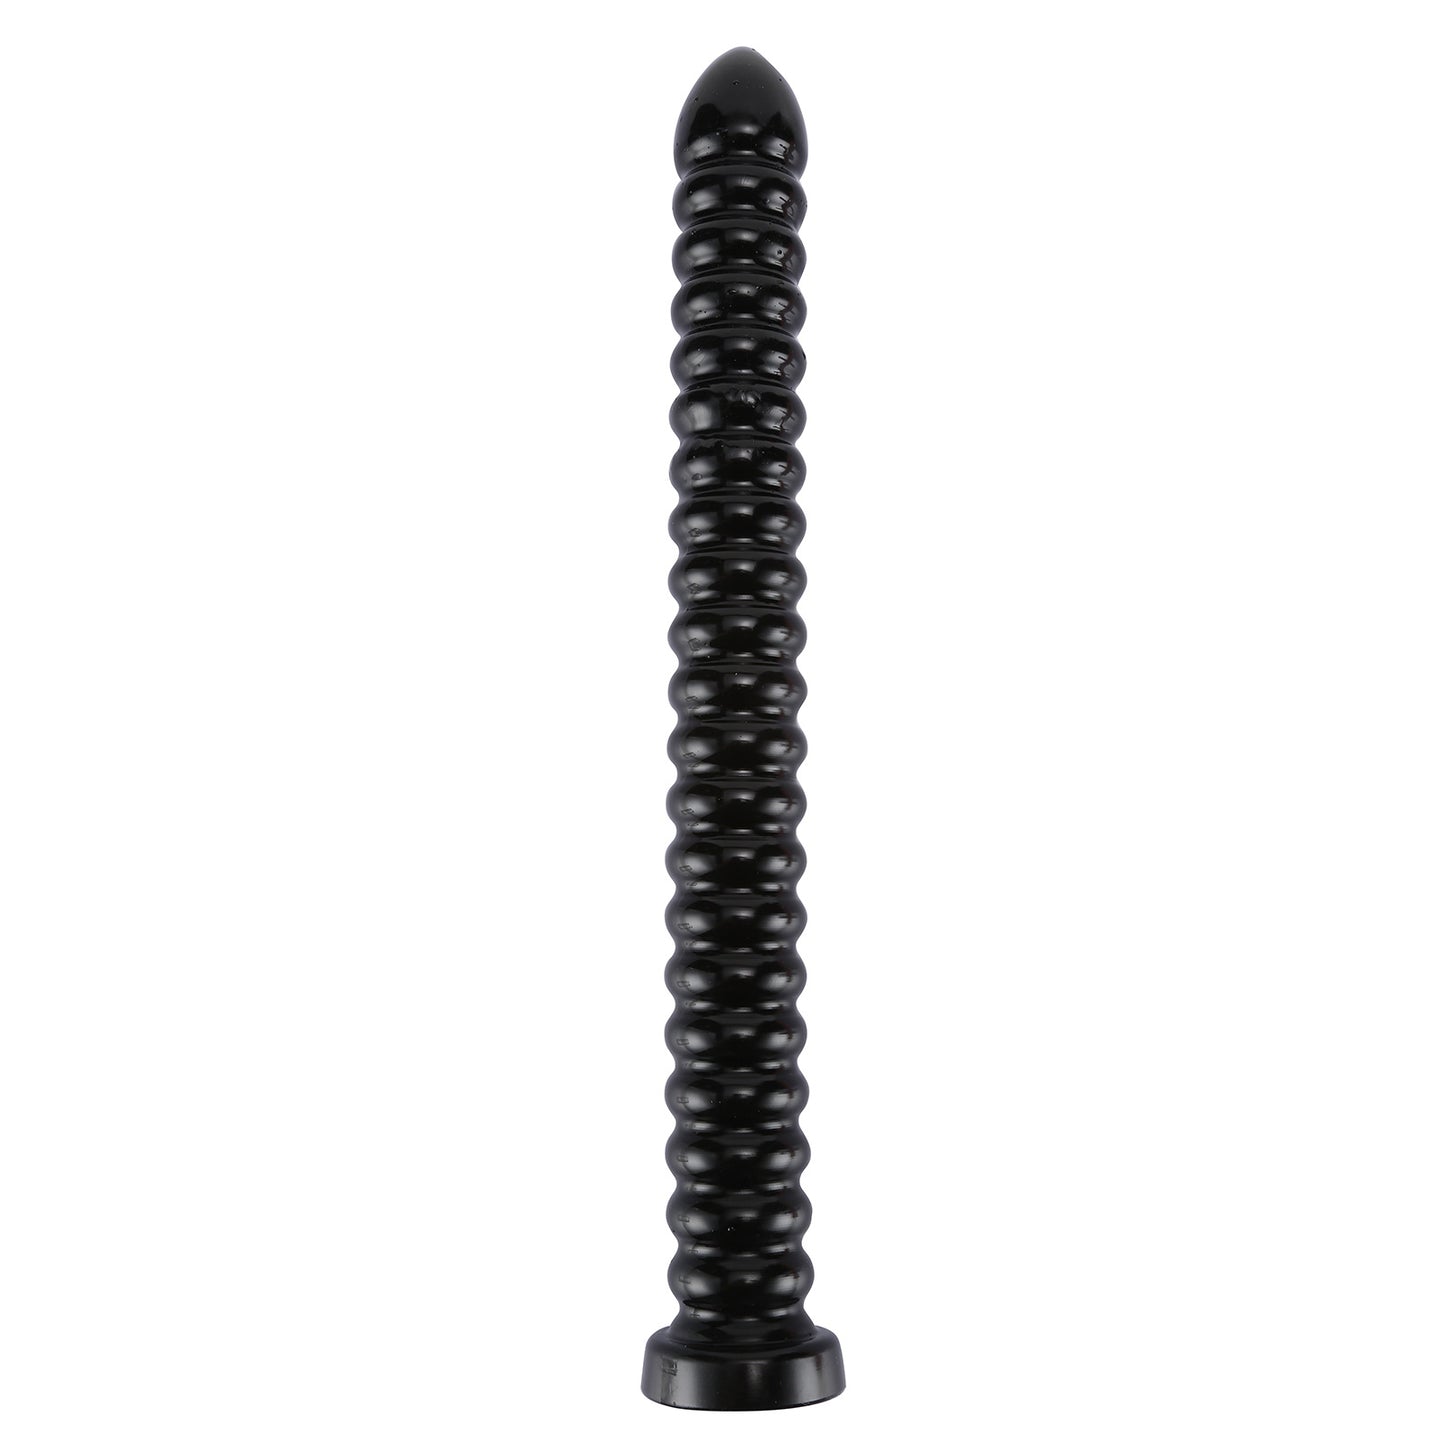 Extra Long Tail Butt Plug - Sprial Beads Anal Dildo Vaginal Prostate Massager